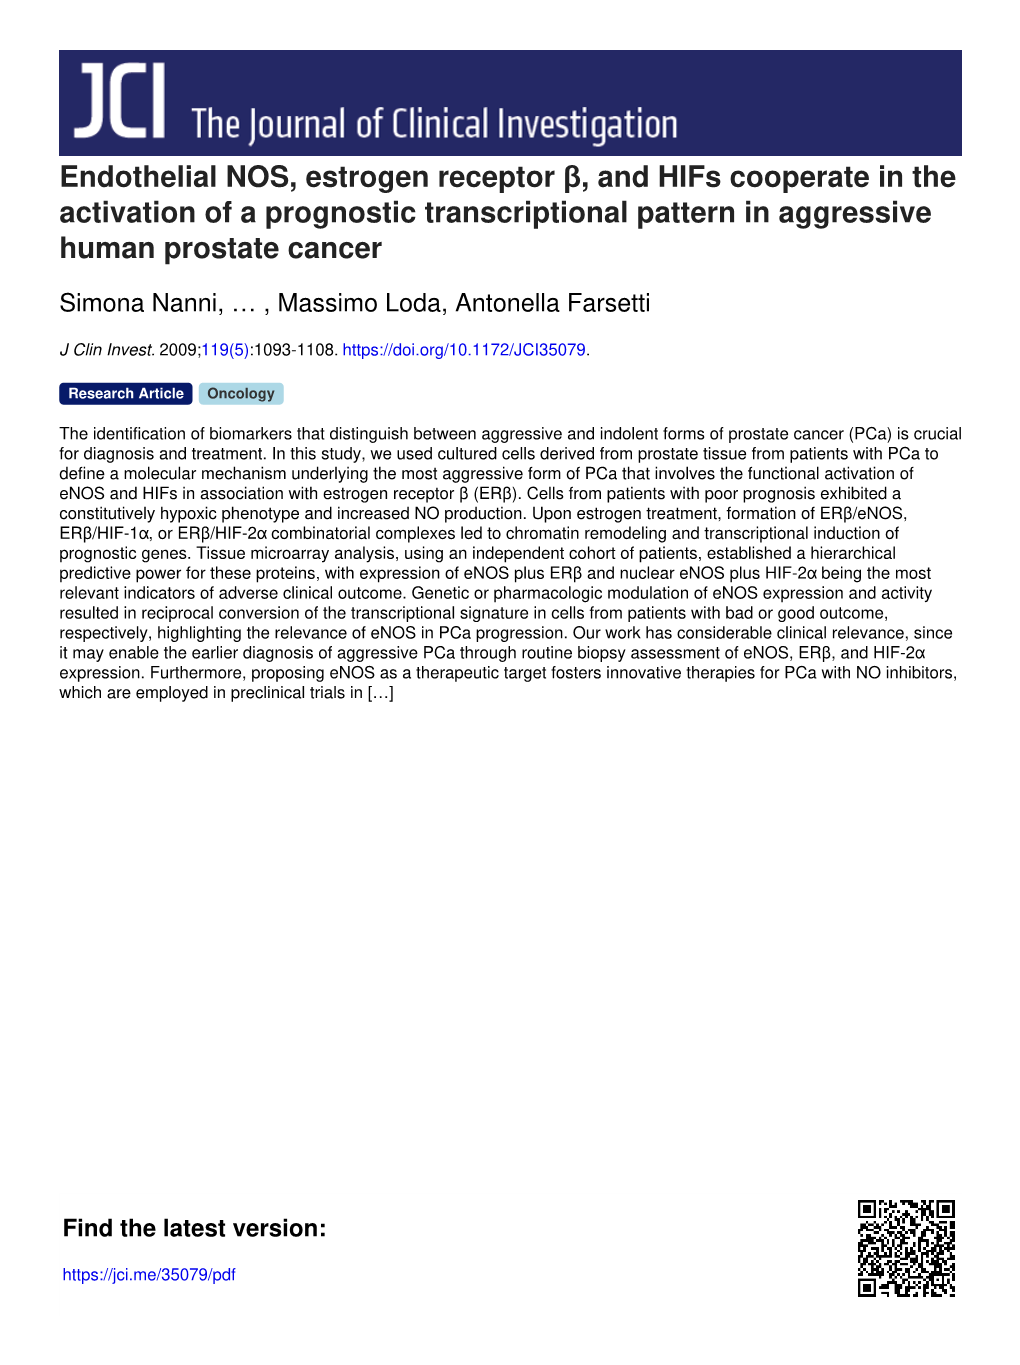 Endothelial NOS, Estrogen Receptor Β, and Hifs Cooperate in the Activation of a Prognostic Transcriptional Pattern in Aggressive Human Prostate Cancer